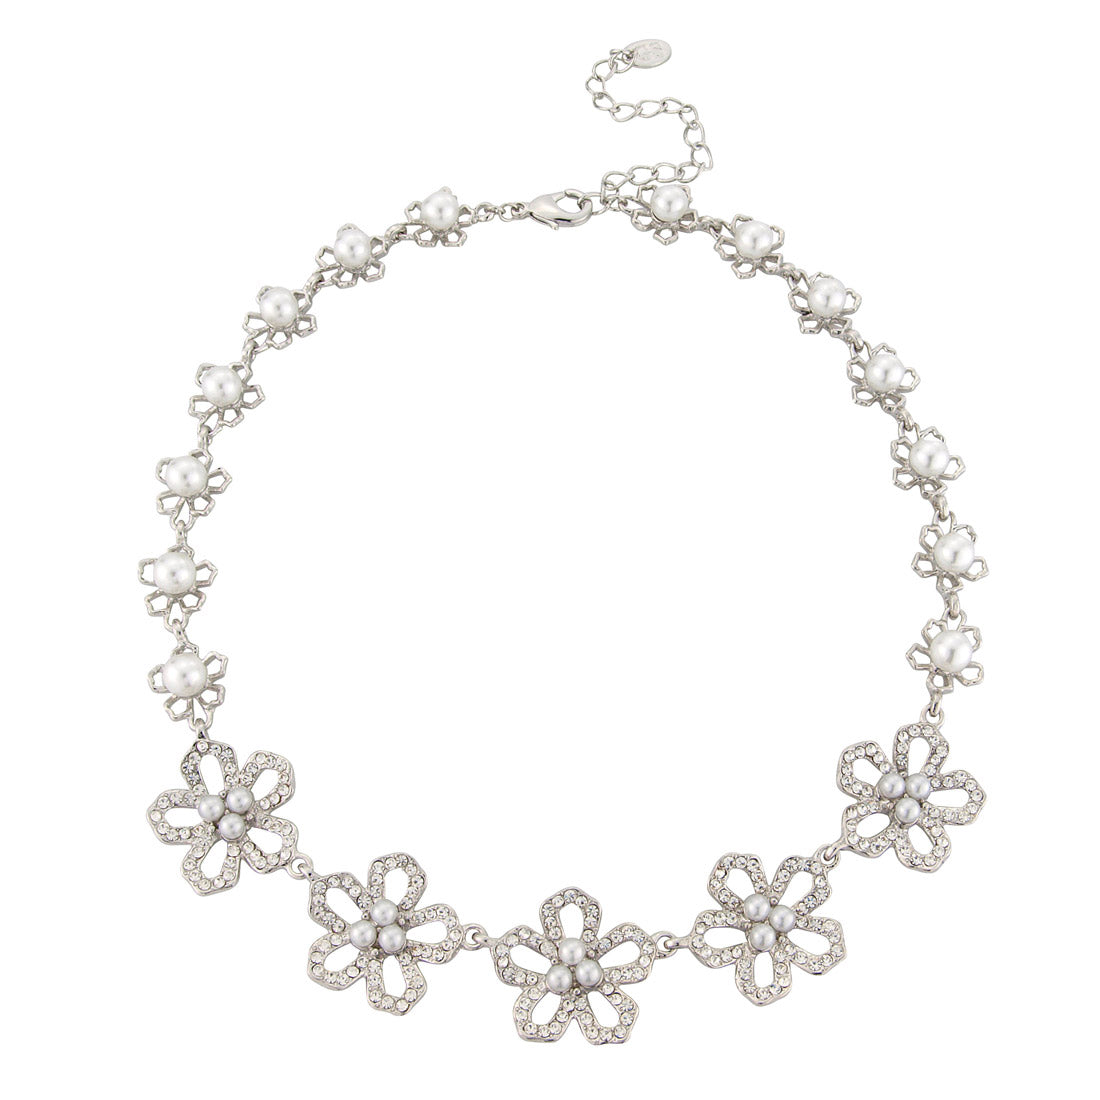 Petals of Pearls Flower Collar Necklace